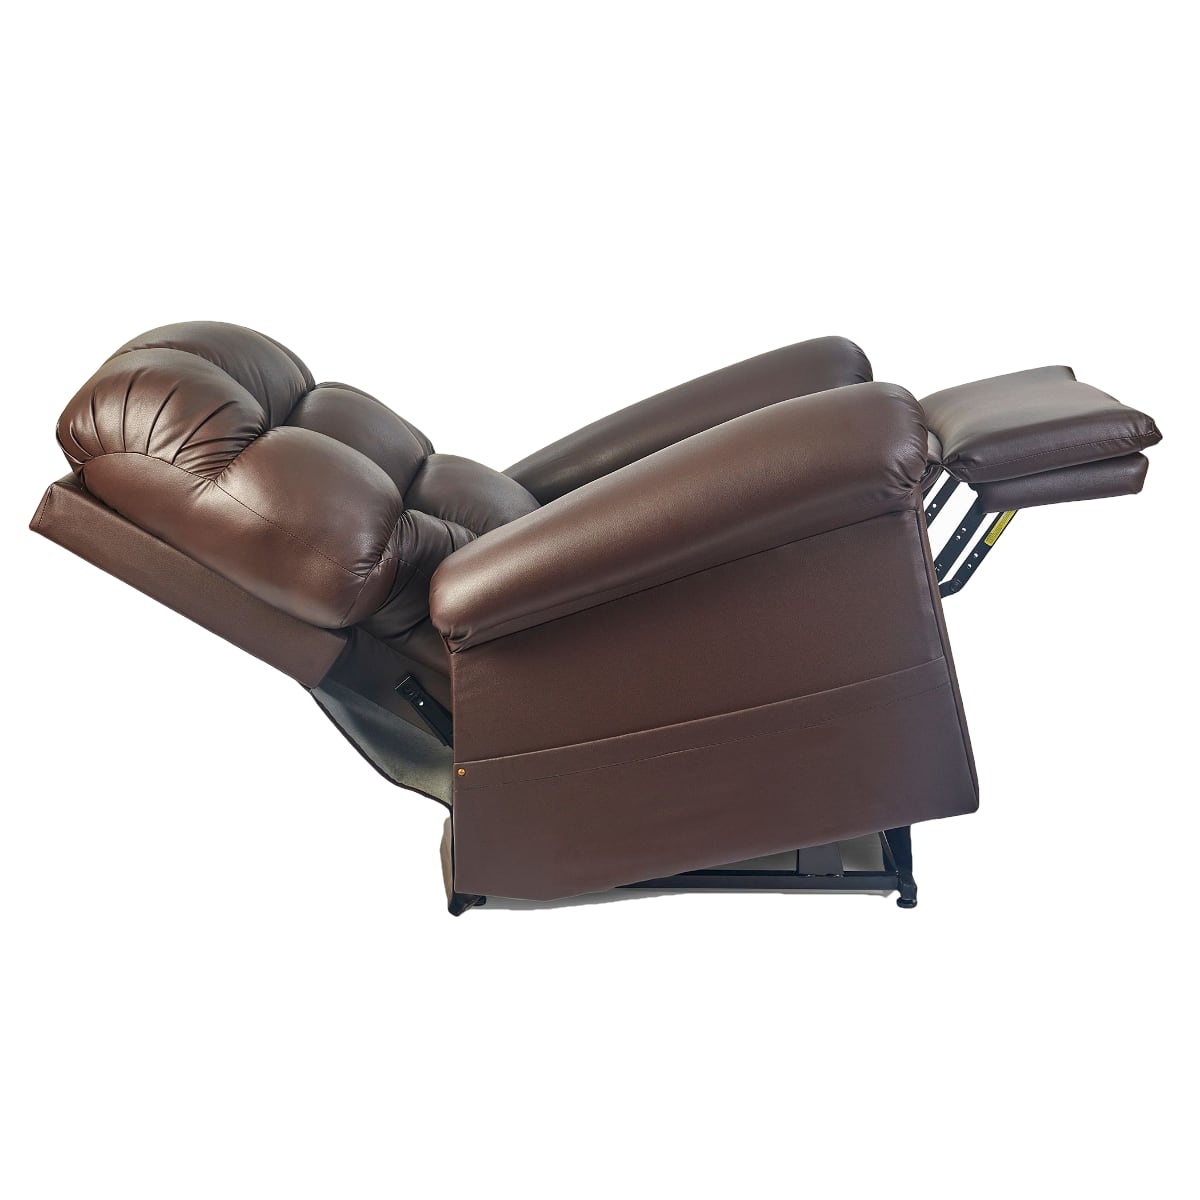 Golden MaxiComfort Cloud lift recliner with Twilight technology in dark brown leather fabric in reclined position